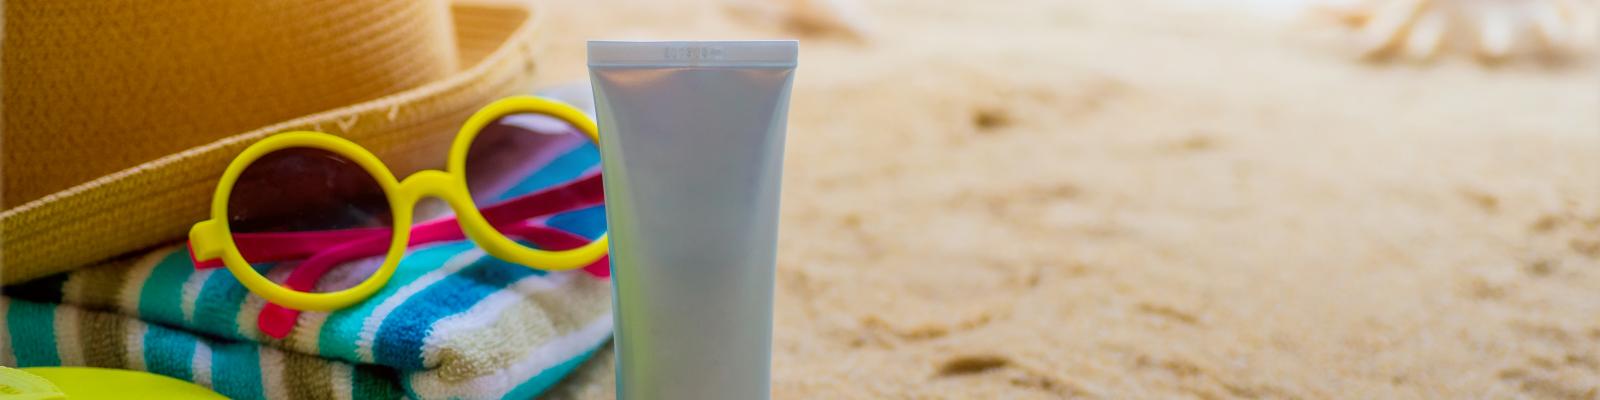 Photo of sunscreen and sunglasses on a beach